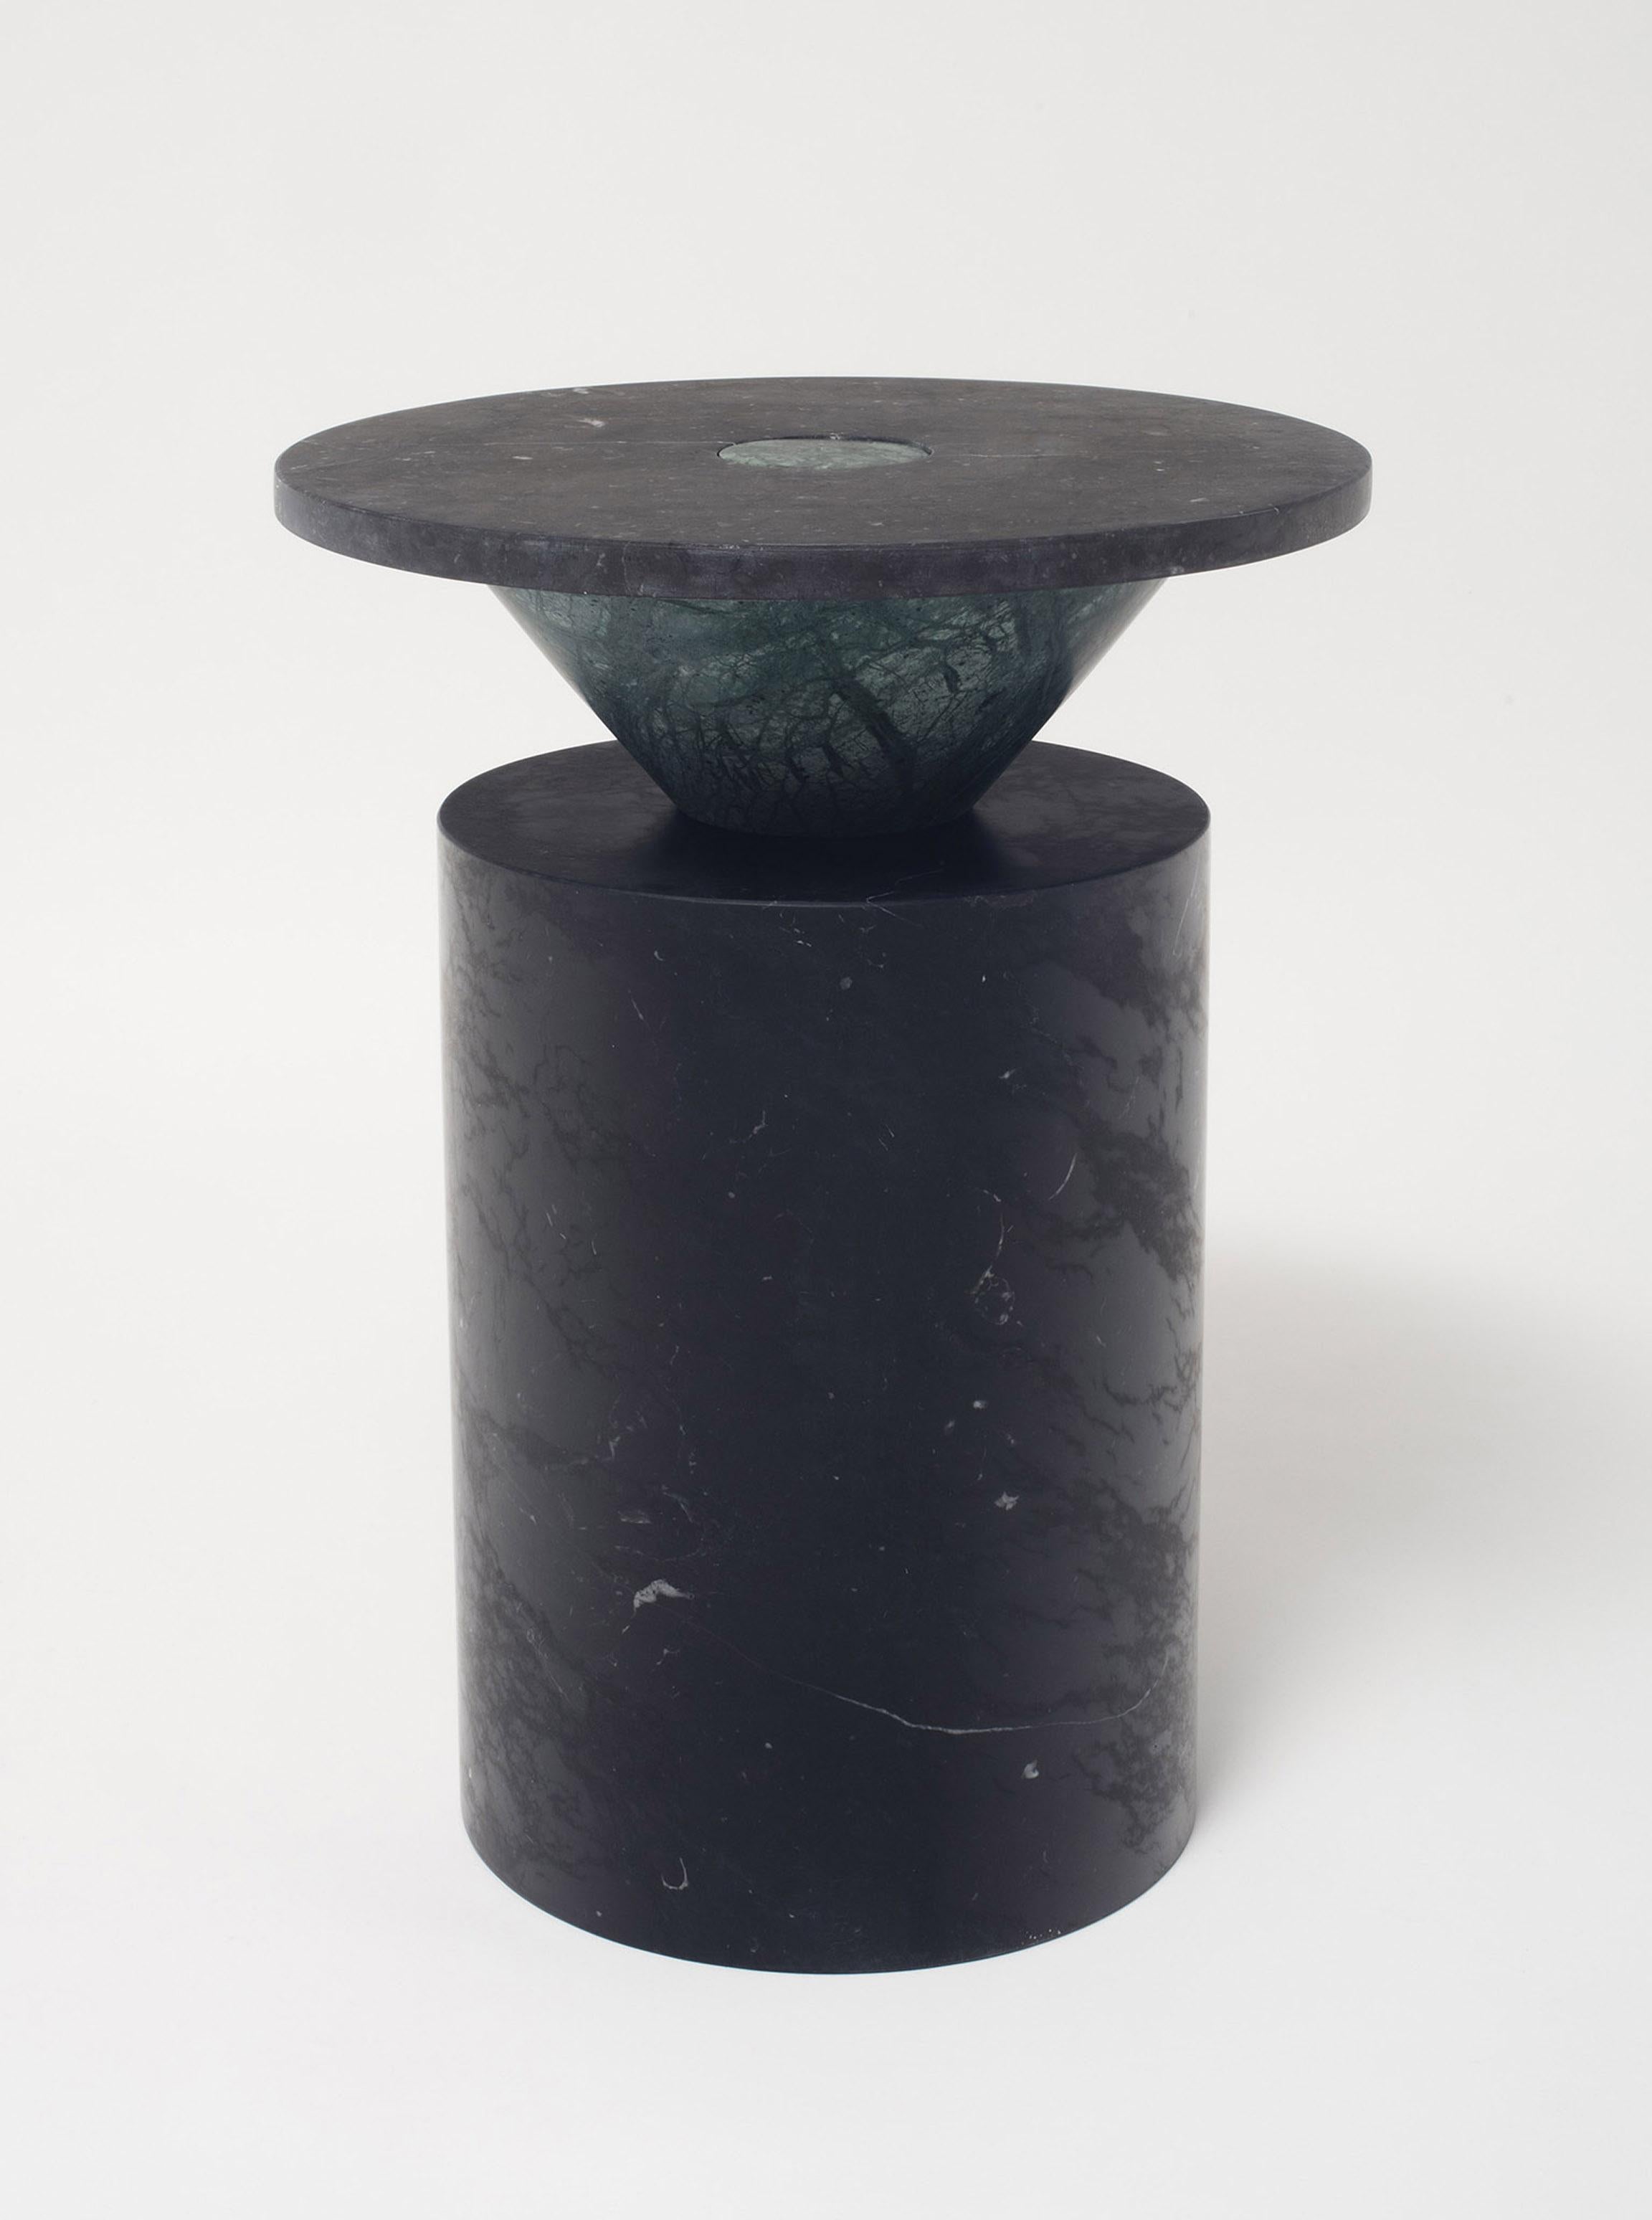 Nero Verde TOTEM Gueridon by Karen Chekerdjian
Nero Marquinia, Verde Imperiale marbles
Measures: 62 x 42 x 42 cm 
Numbered Edition

Karen Chekerdjian
“I am not trying to say anything. 
But at the same time, I am trying to say